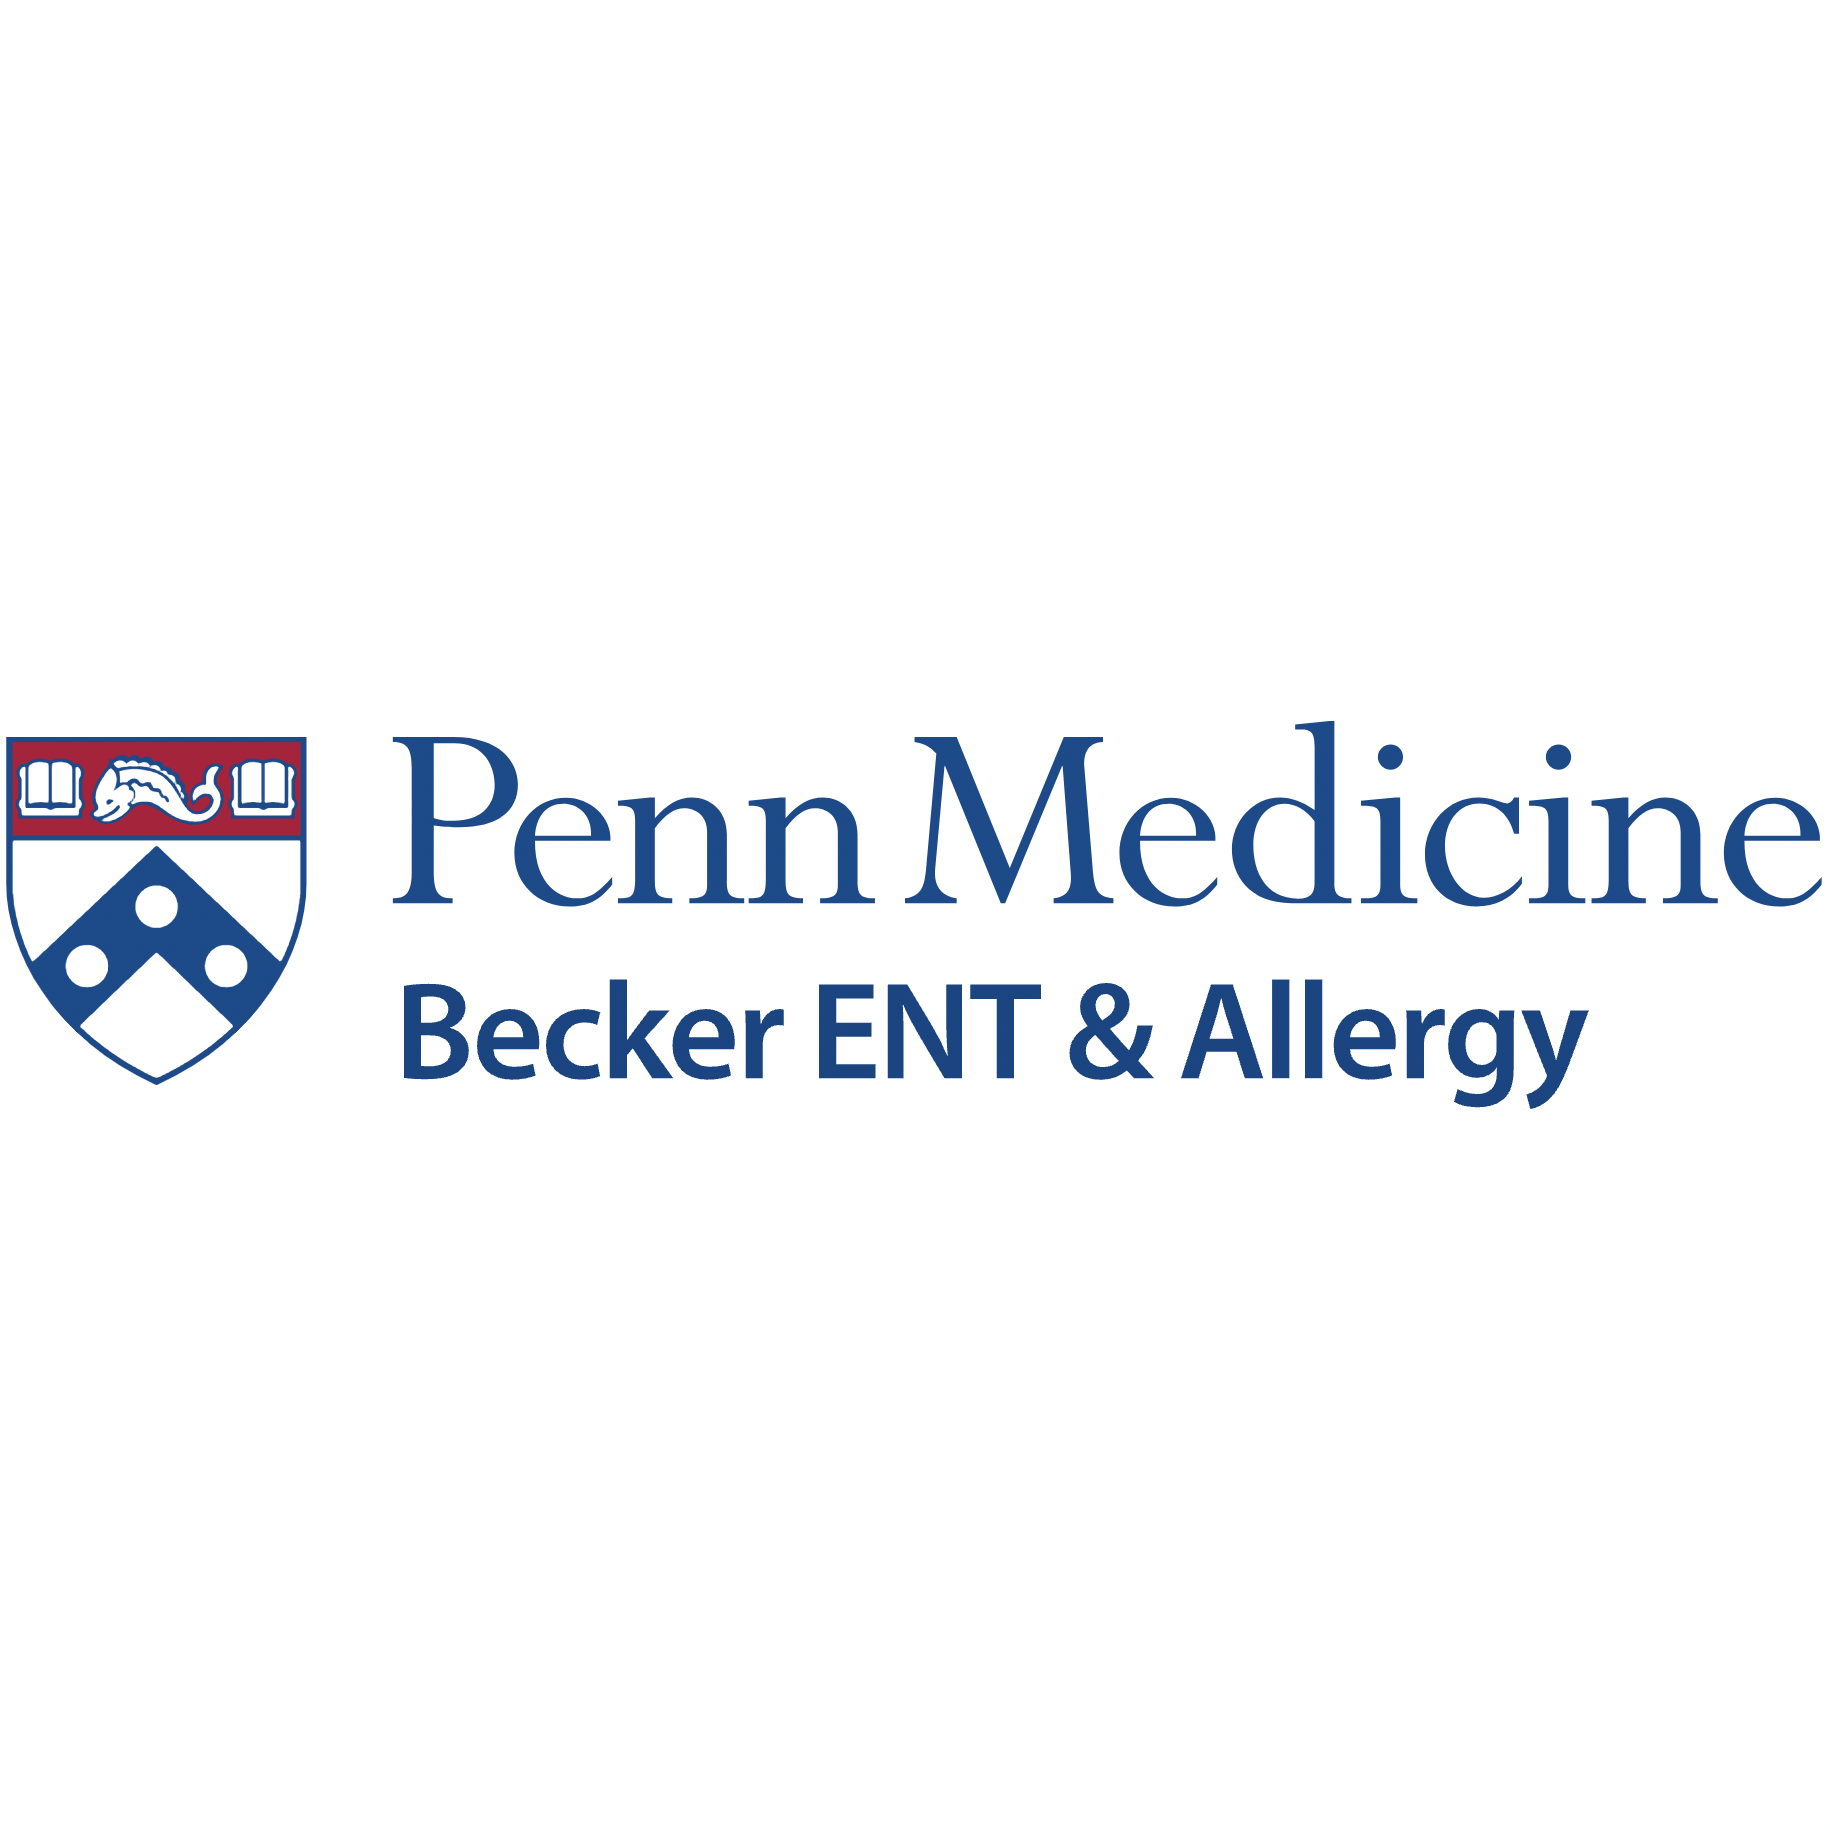 Miami Beach, Florida, United States agency Surgeon's Advisor helped Penn Medicine Becker ENT and Allergy grow their business with SEO and digital marketing